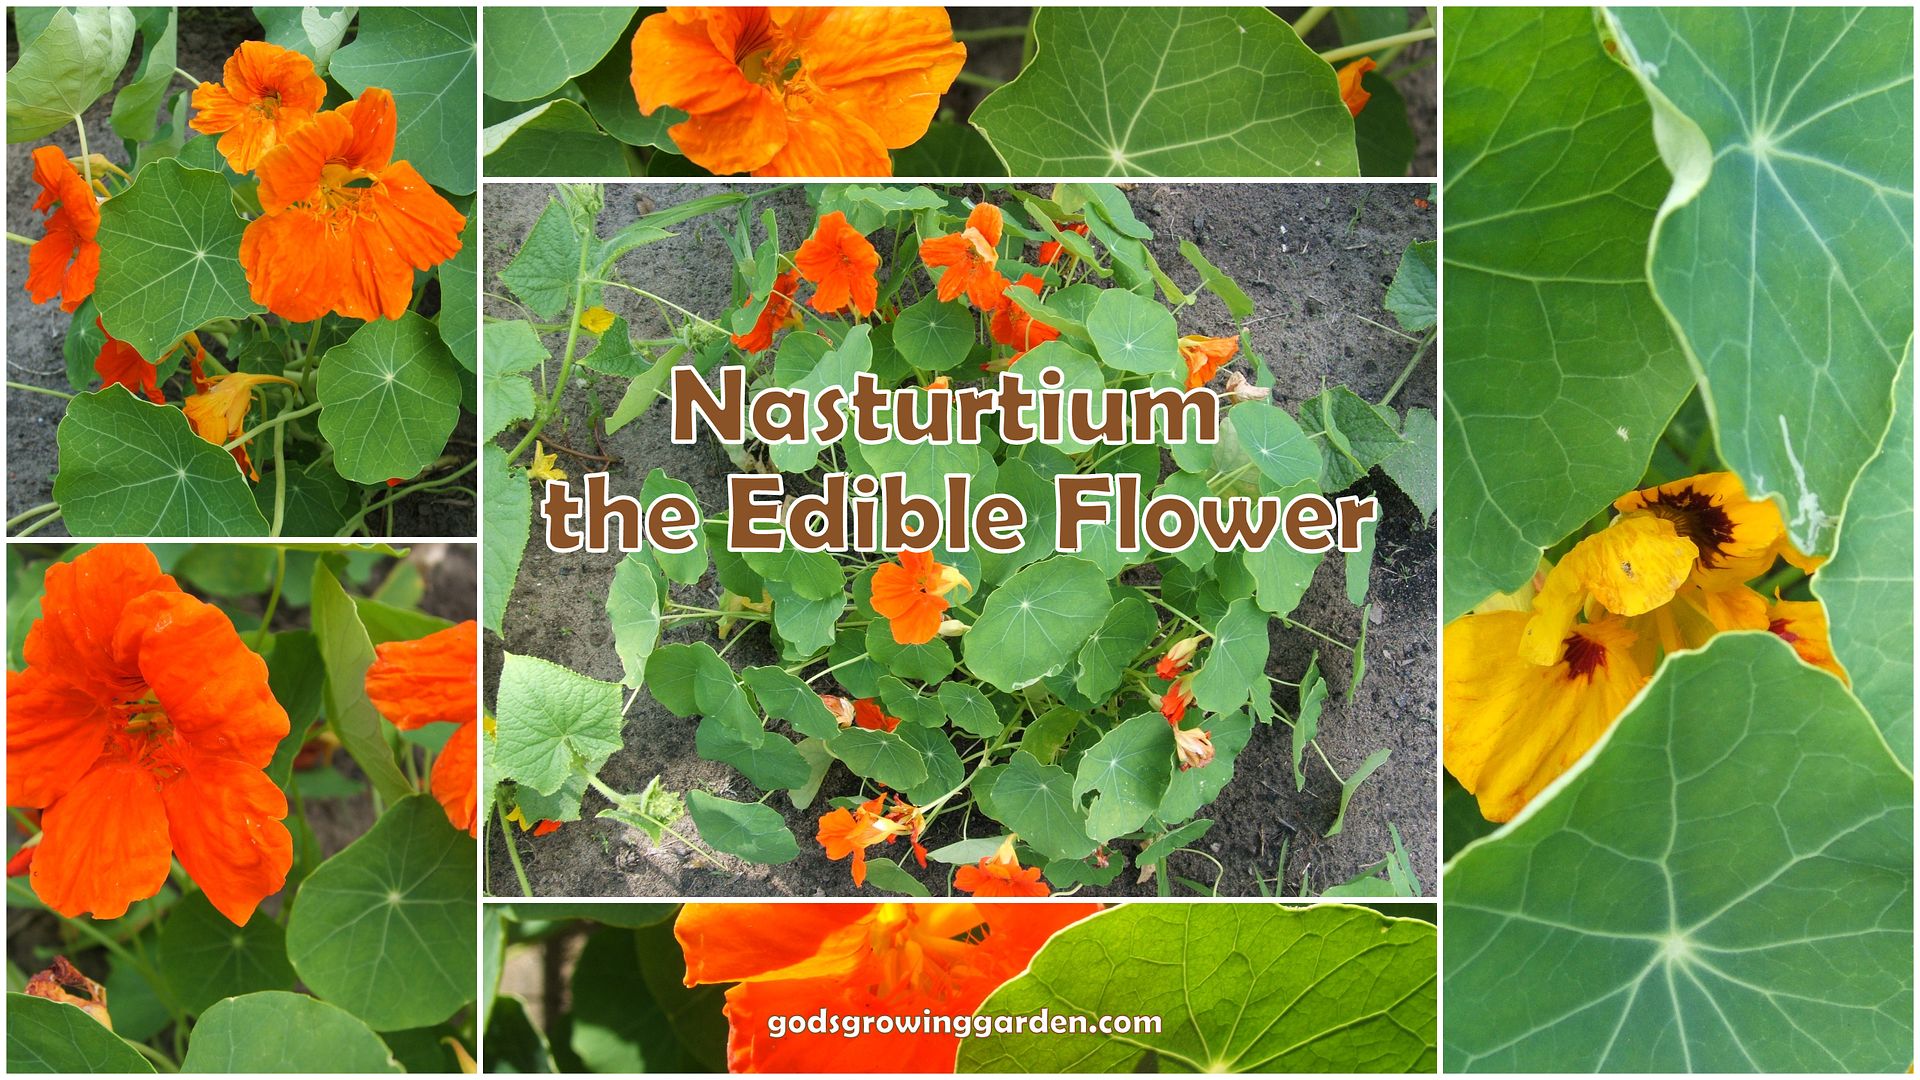 Nasturtiums by Angie Ouellette-Tower for godsgrowinggarden.com photo 2014-07-16_zps5f9ec2c9.jpg